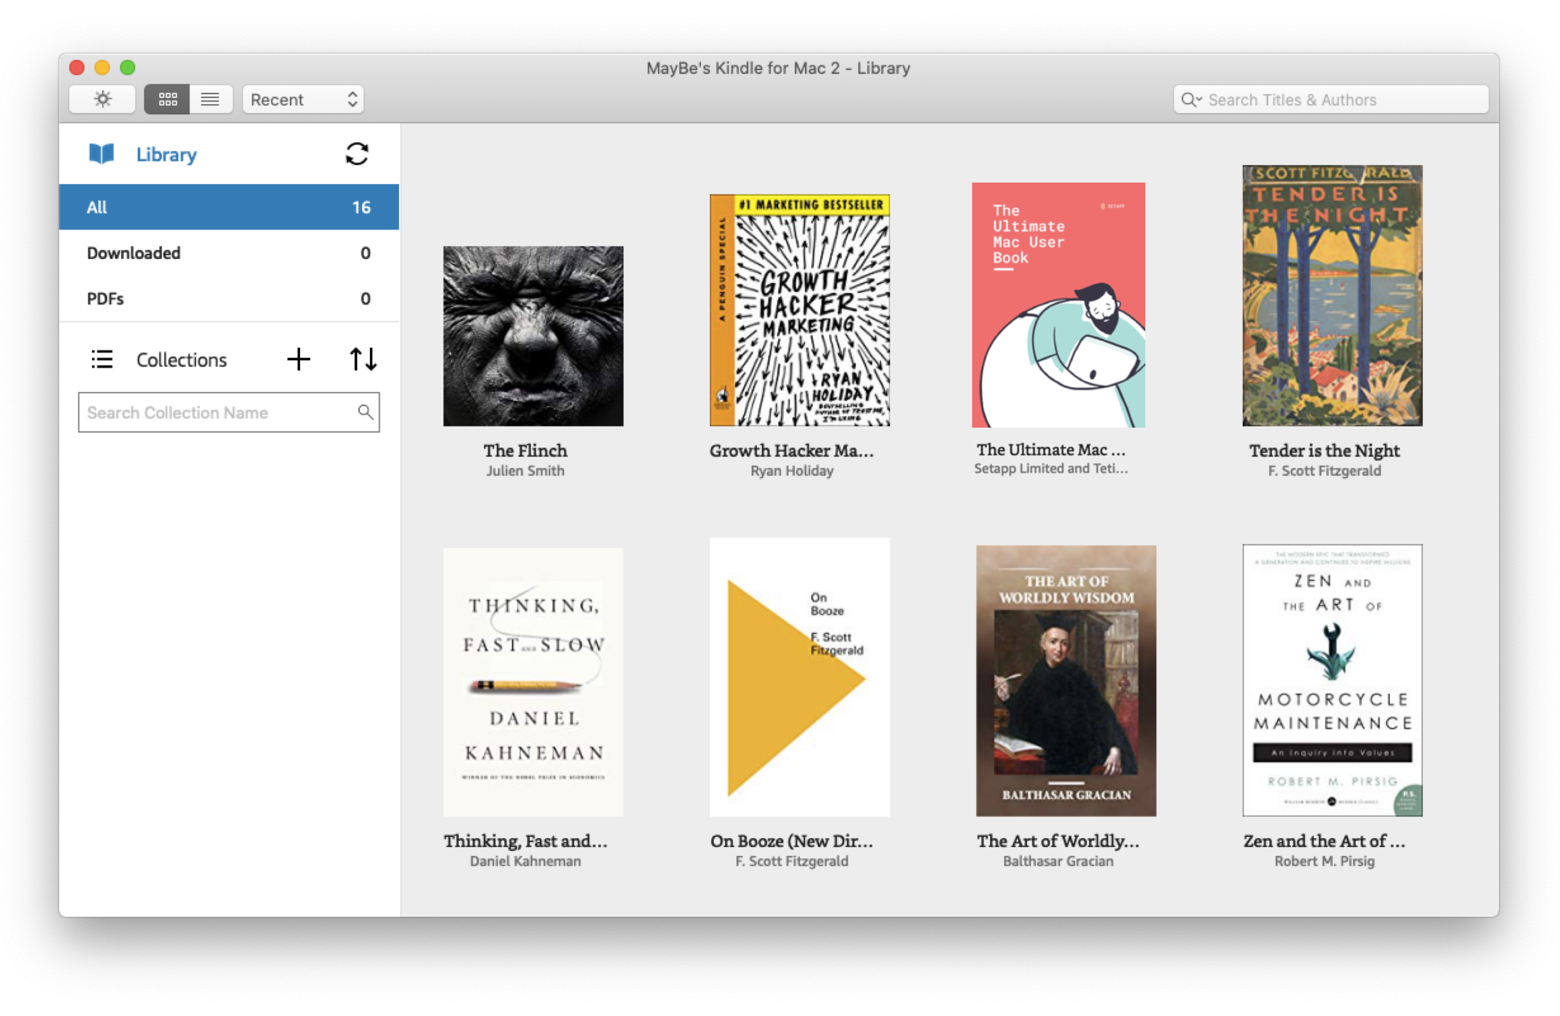 my kindle mac app does not reflect what is on my kindle